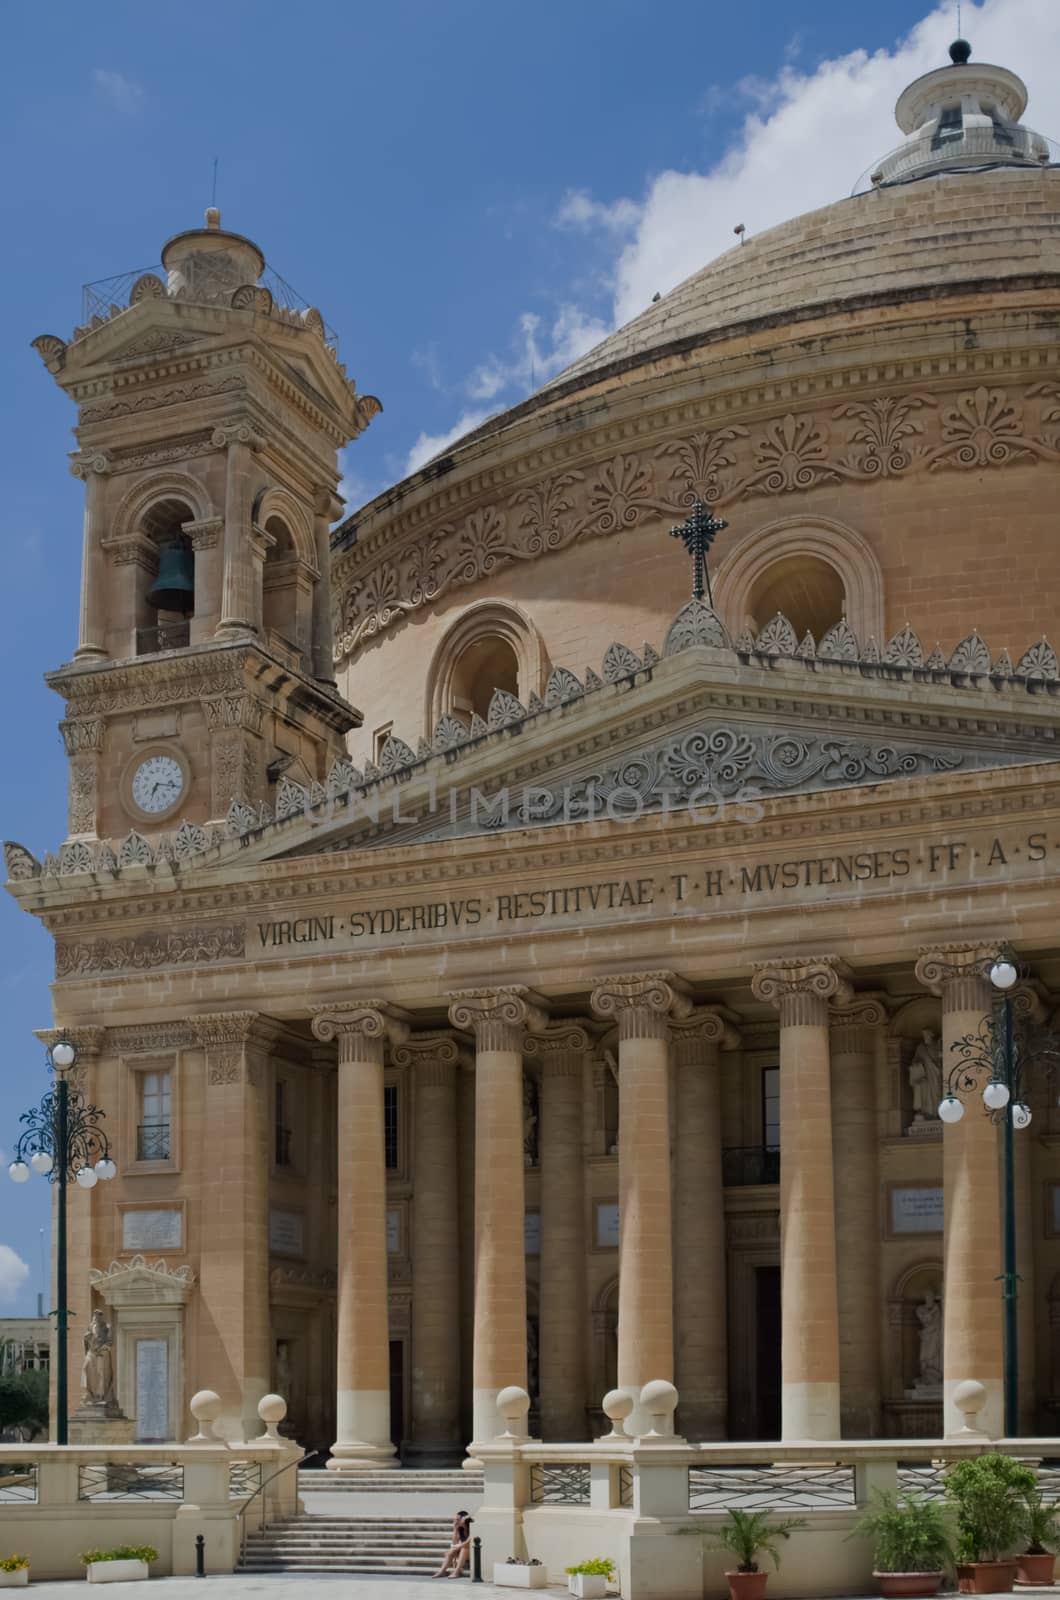 The monumental parish church of St Mary dedicated to the Assumption of Our Lady, known as the Mosta Rotunda or Mosta Dome – Mosta, Malta.